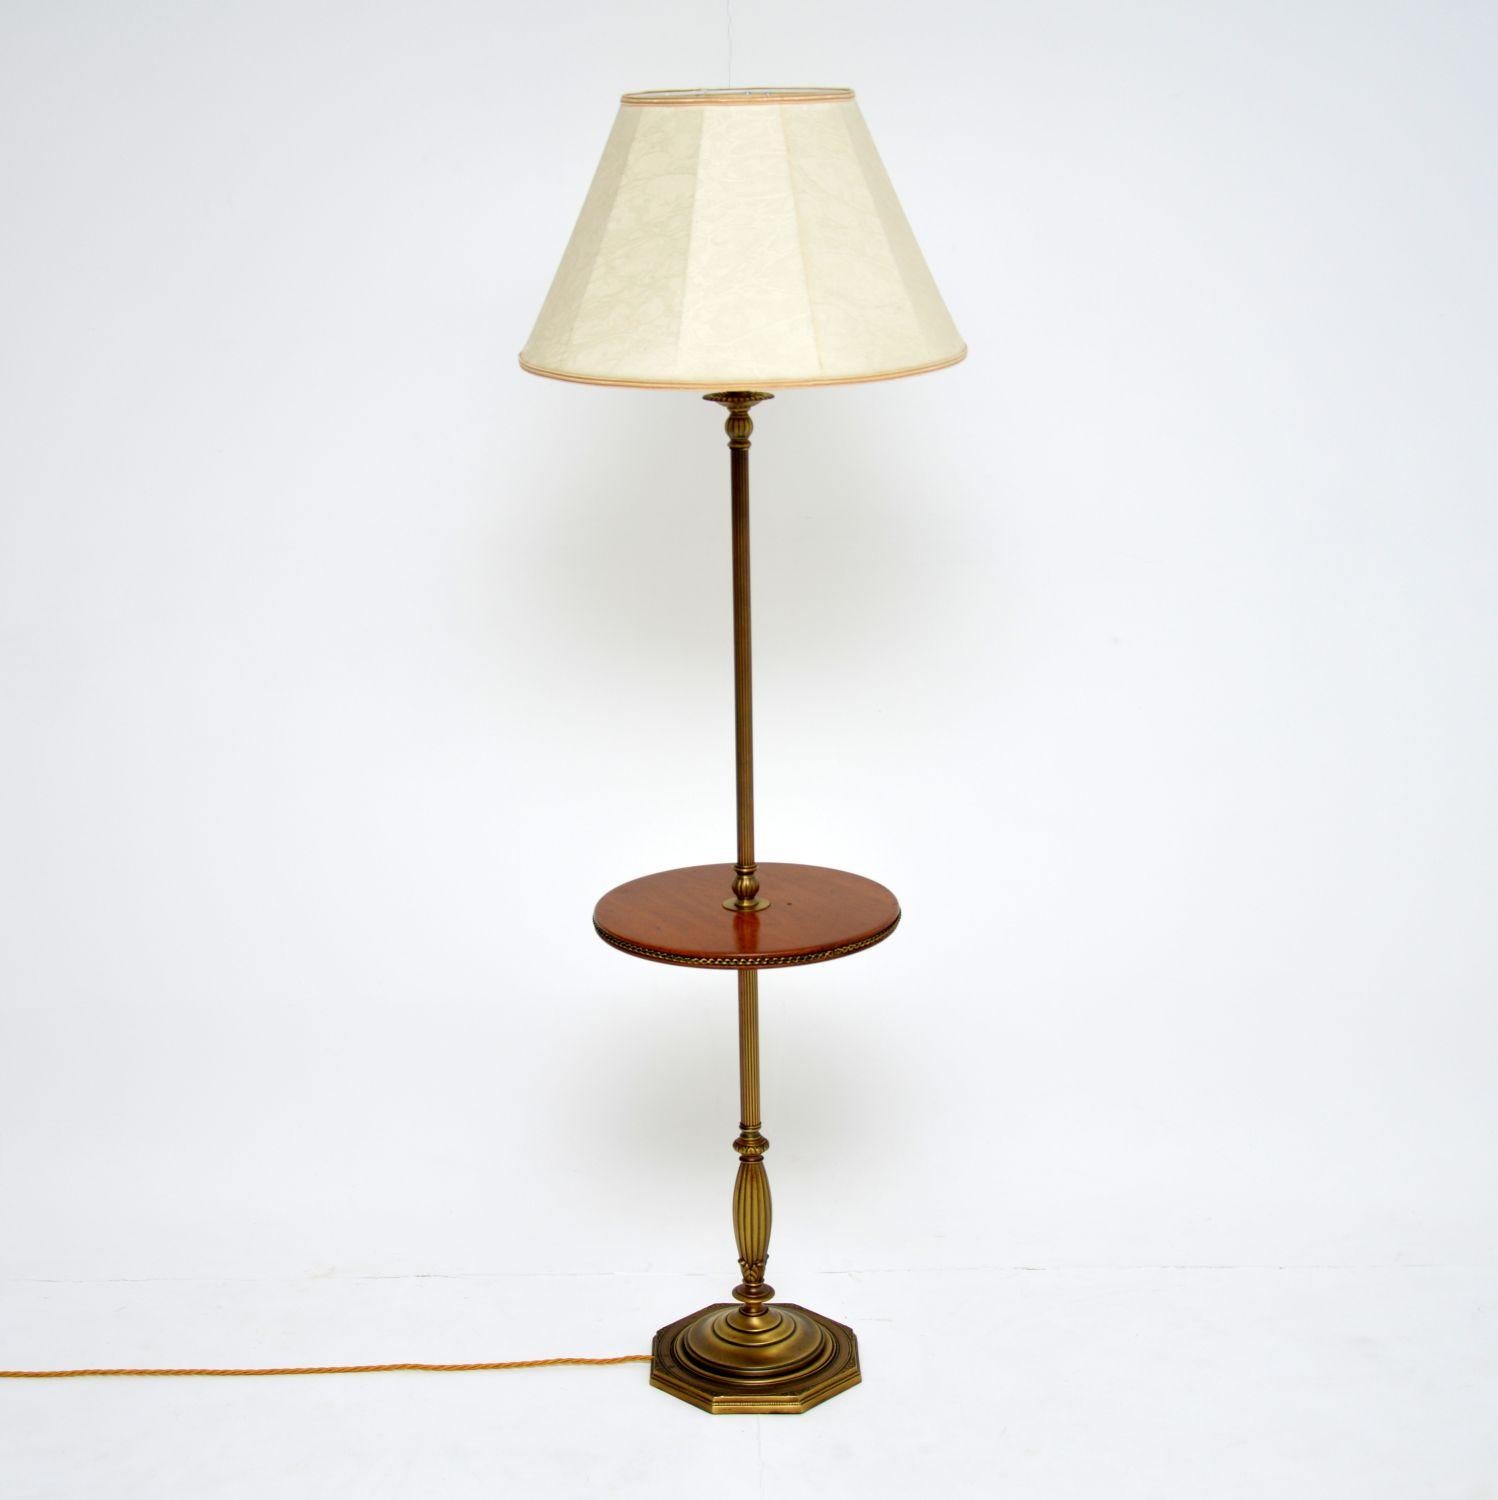 A beautiful antique floor lamp dating from the 1920s-1930s, this is of super quality. The solid brass frame is extremely well made with beautiful detailing throughout. The base is particularly beautiful, as is the rope edge design around the built